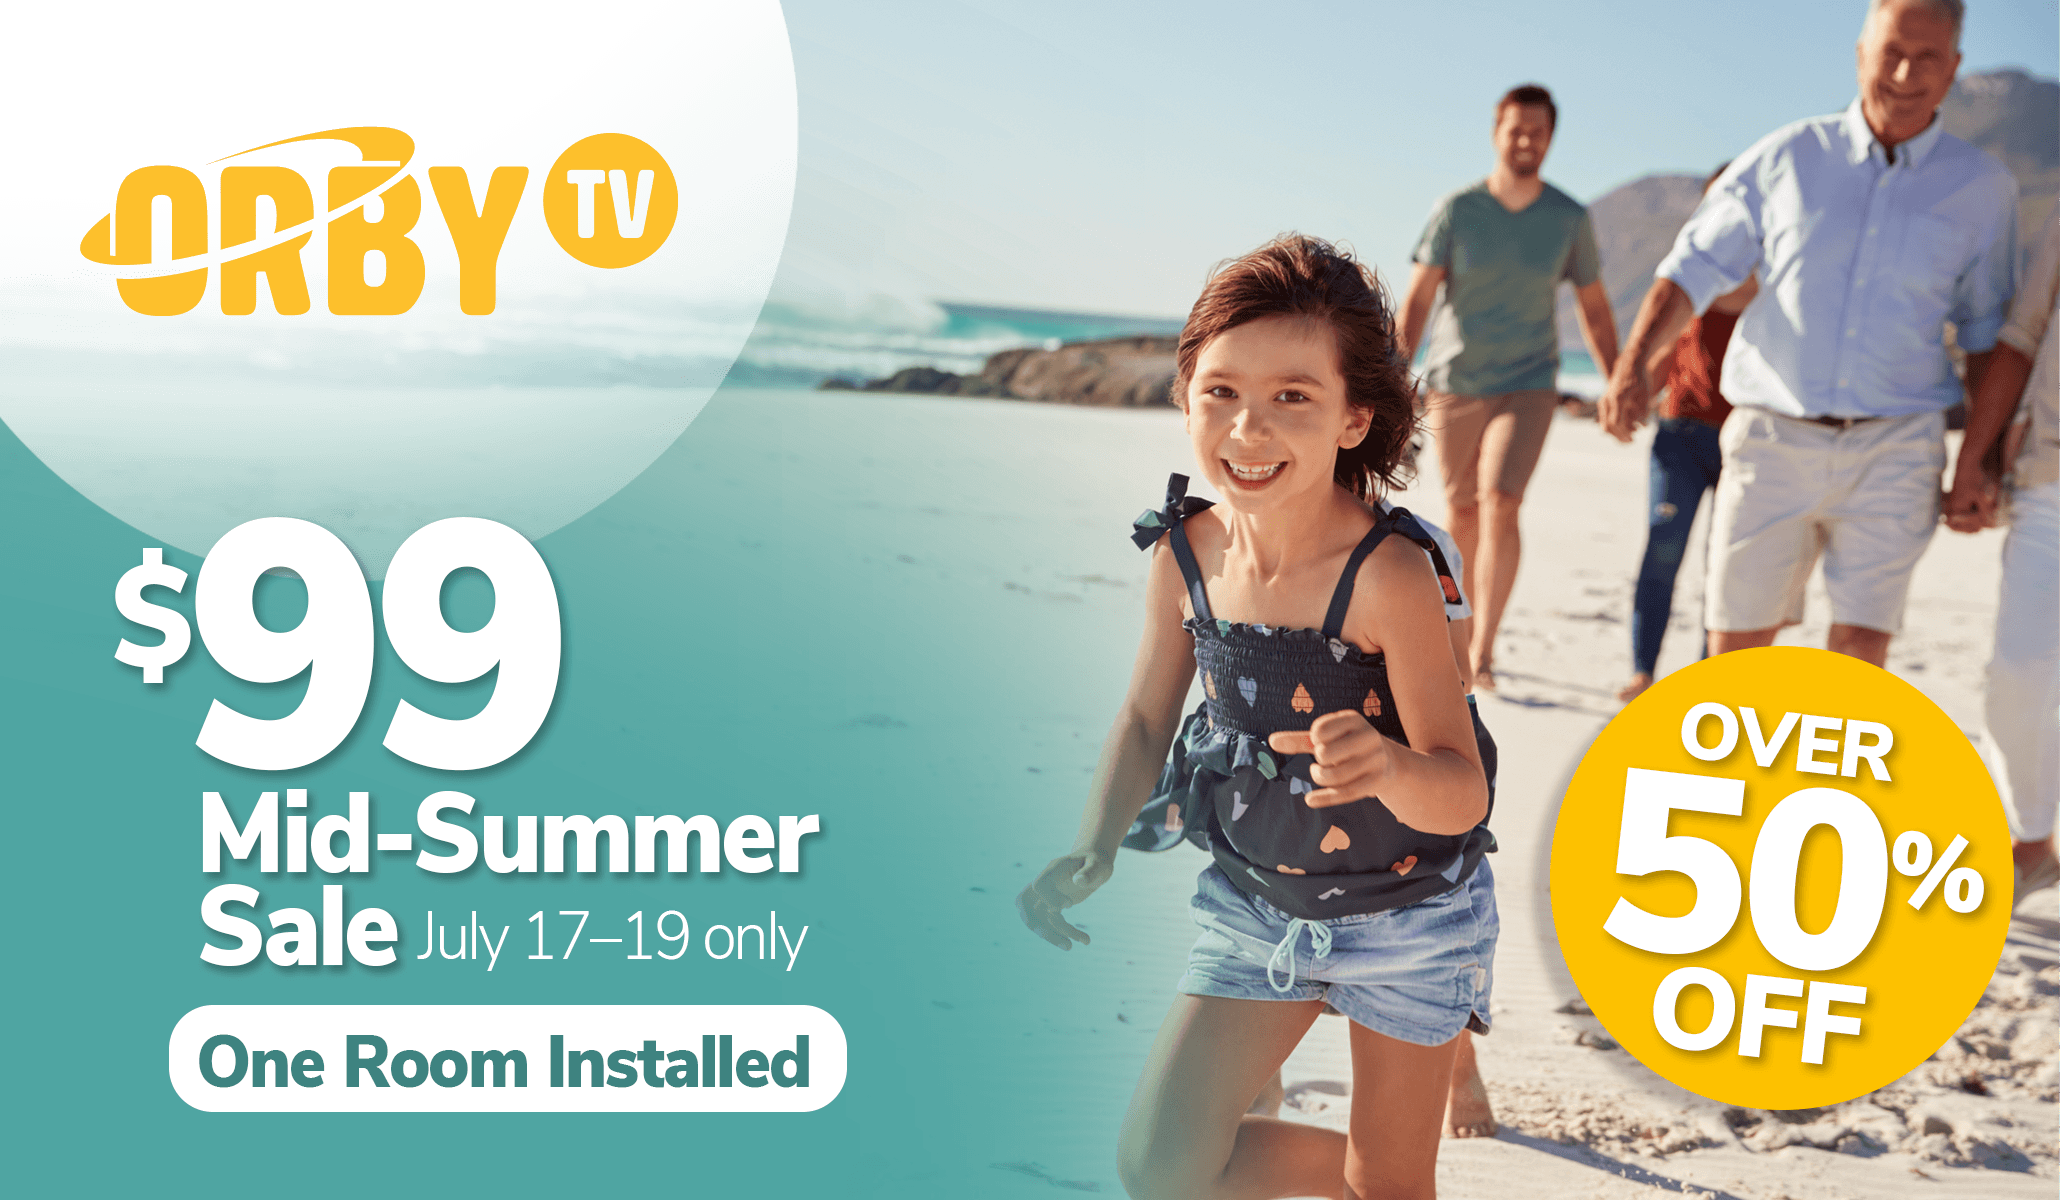 Reminder: Orby TV’s $99 Deal is Back This Weekend (Ends Today)